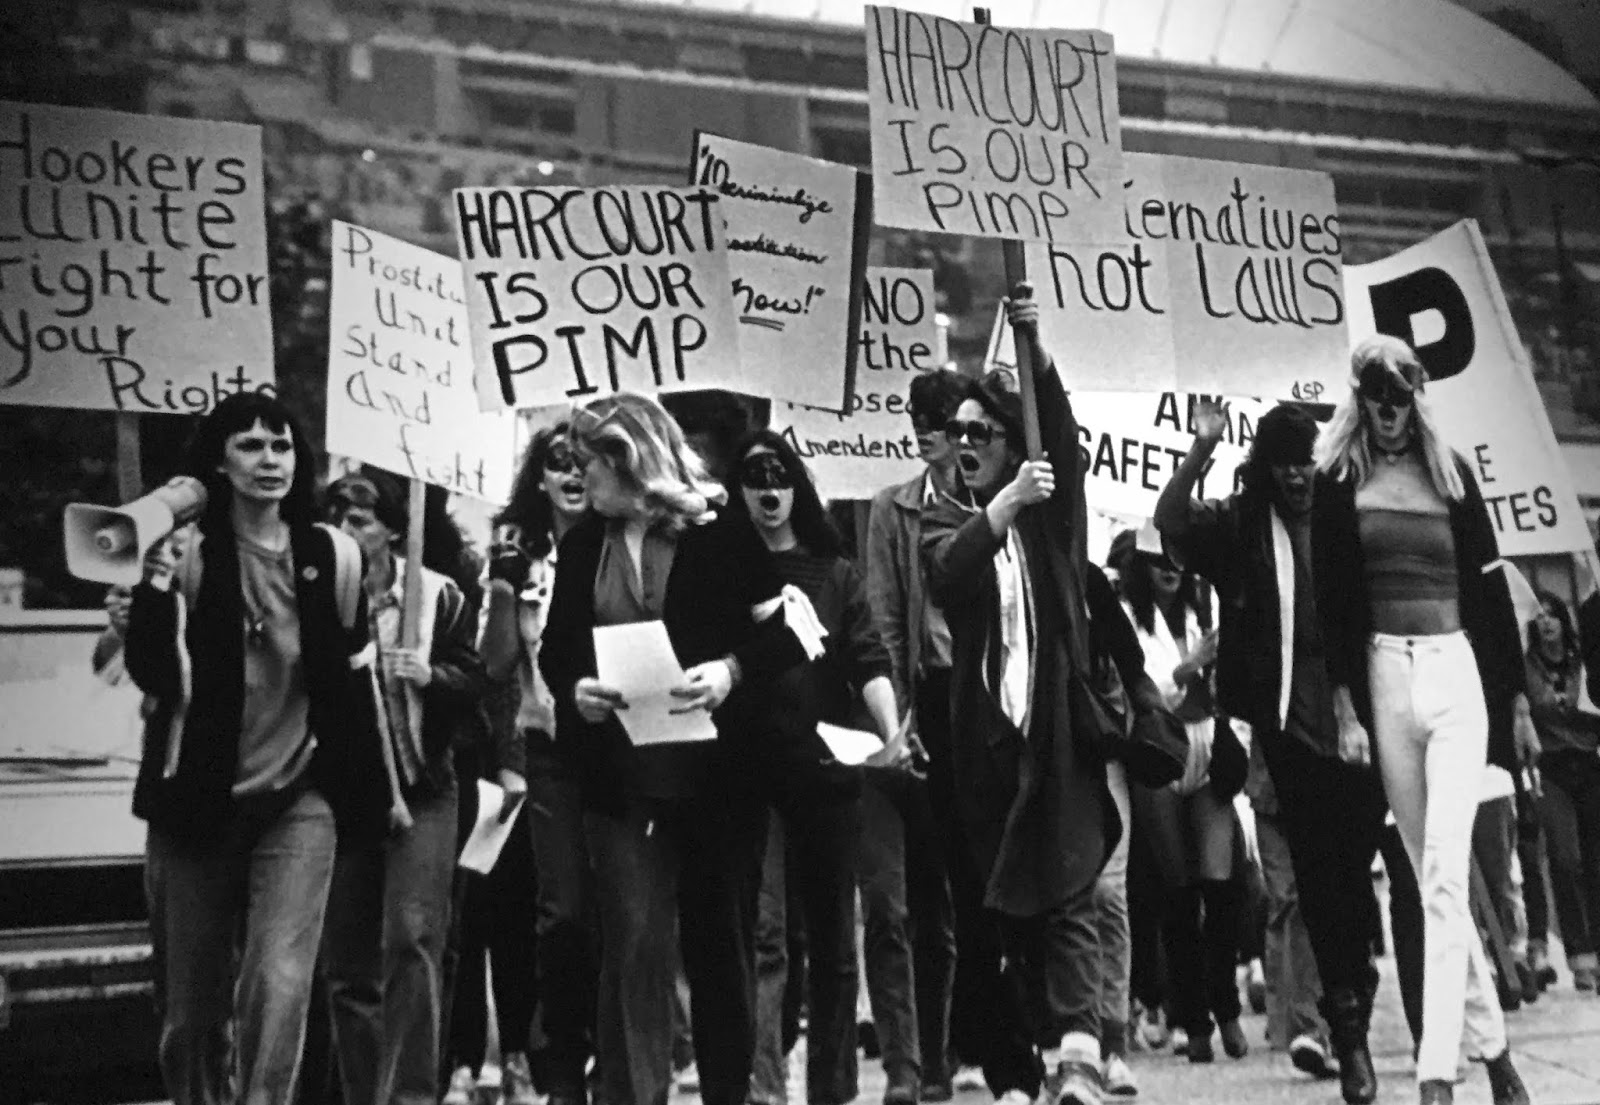 First Protest, Alliance for the Safety of Prostitutes, April 20, 1983. Photo: Macneill, Vancouver Sun